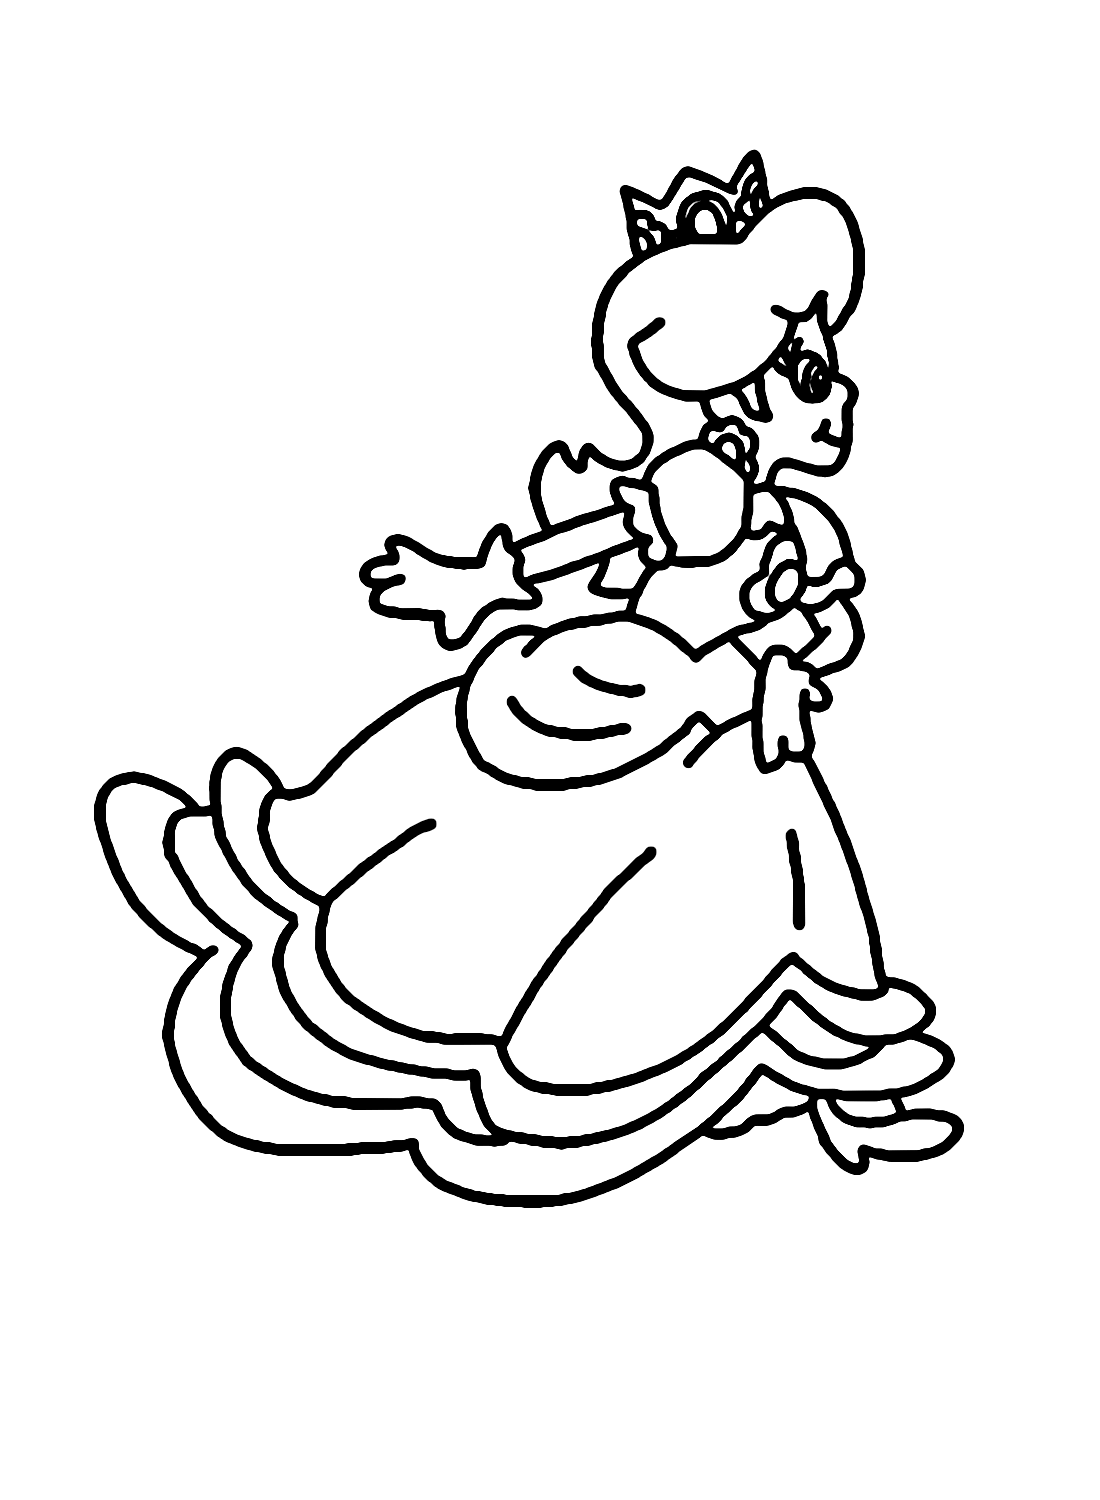 Princess Daisy Running Coloring Pages